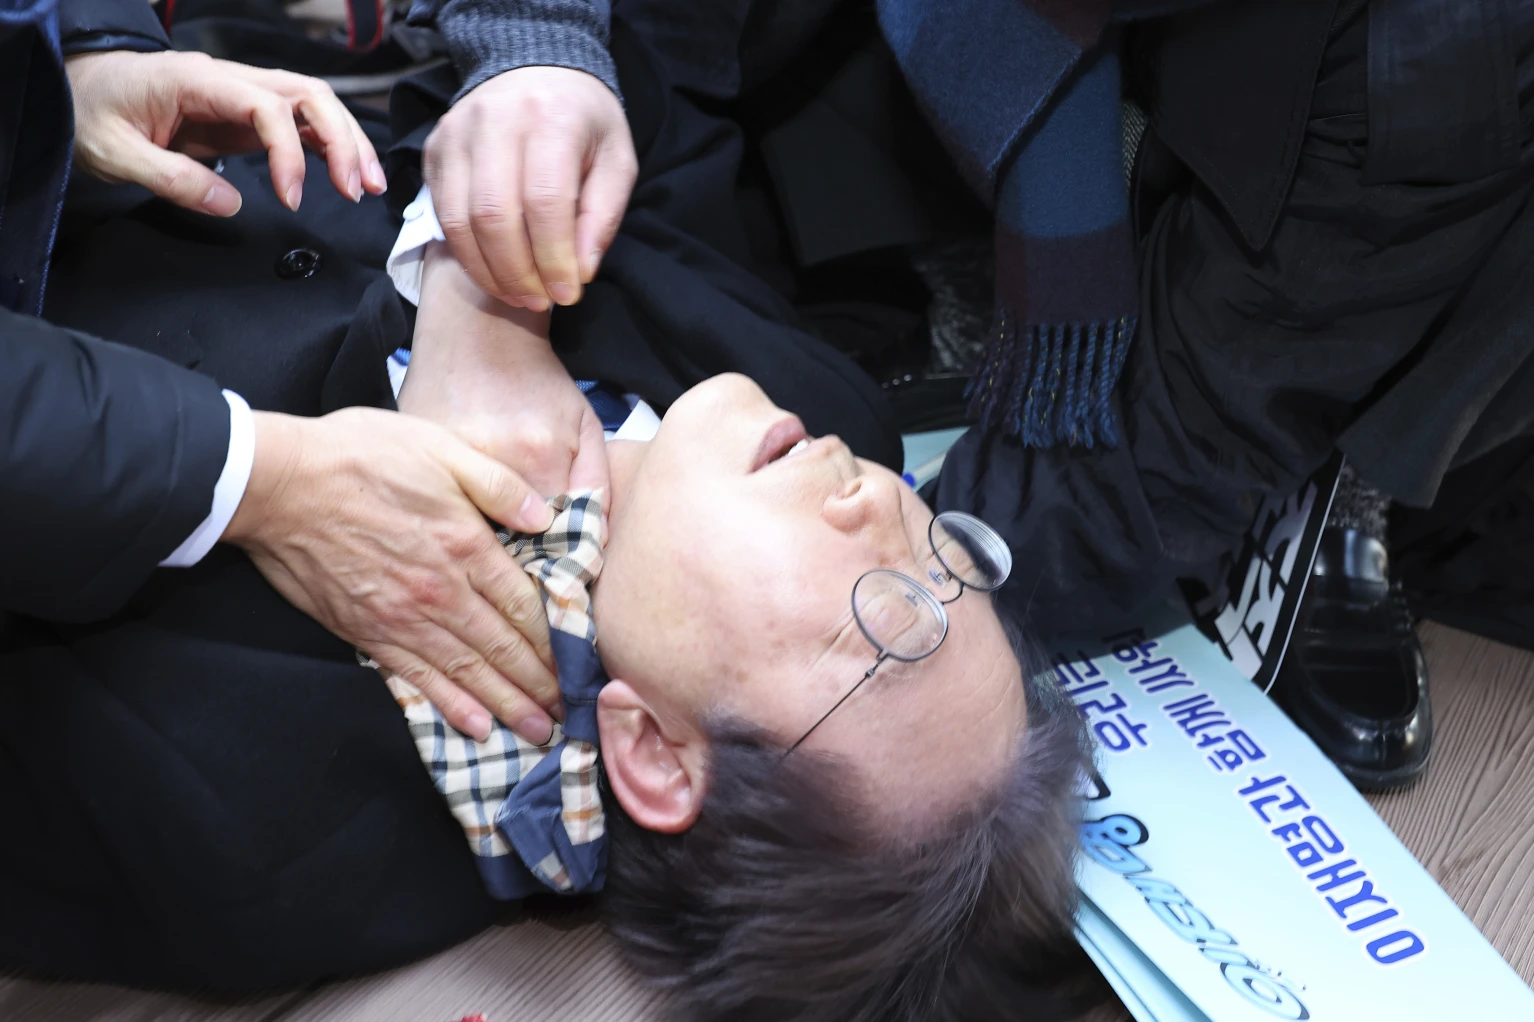 South Korean opposition leader Jae-myung stabbed in the neck by knife-wielding attacker